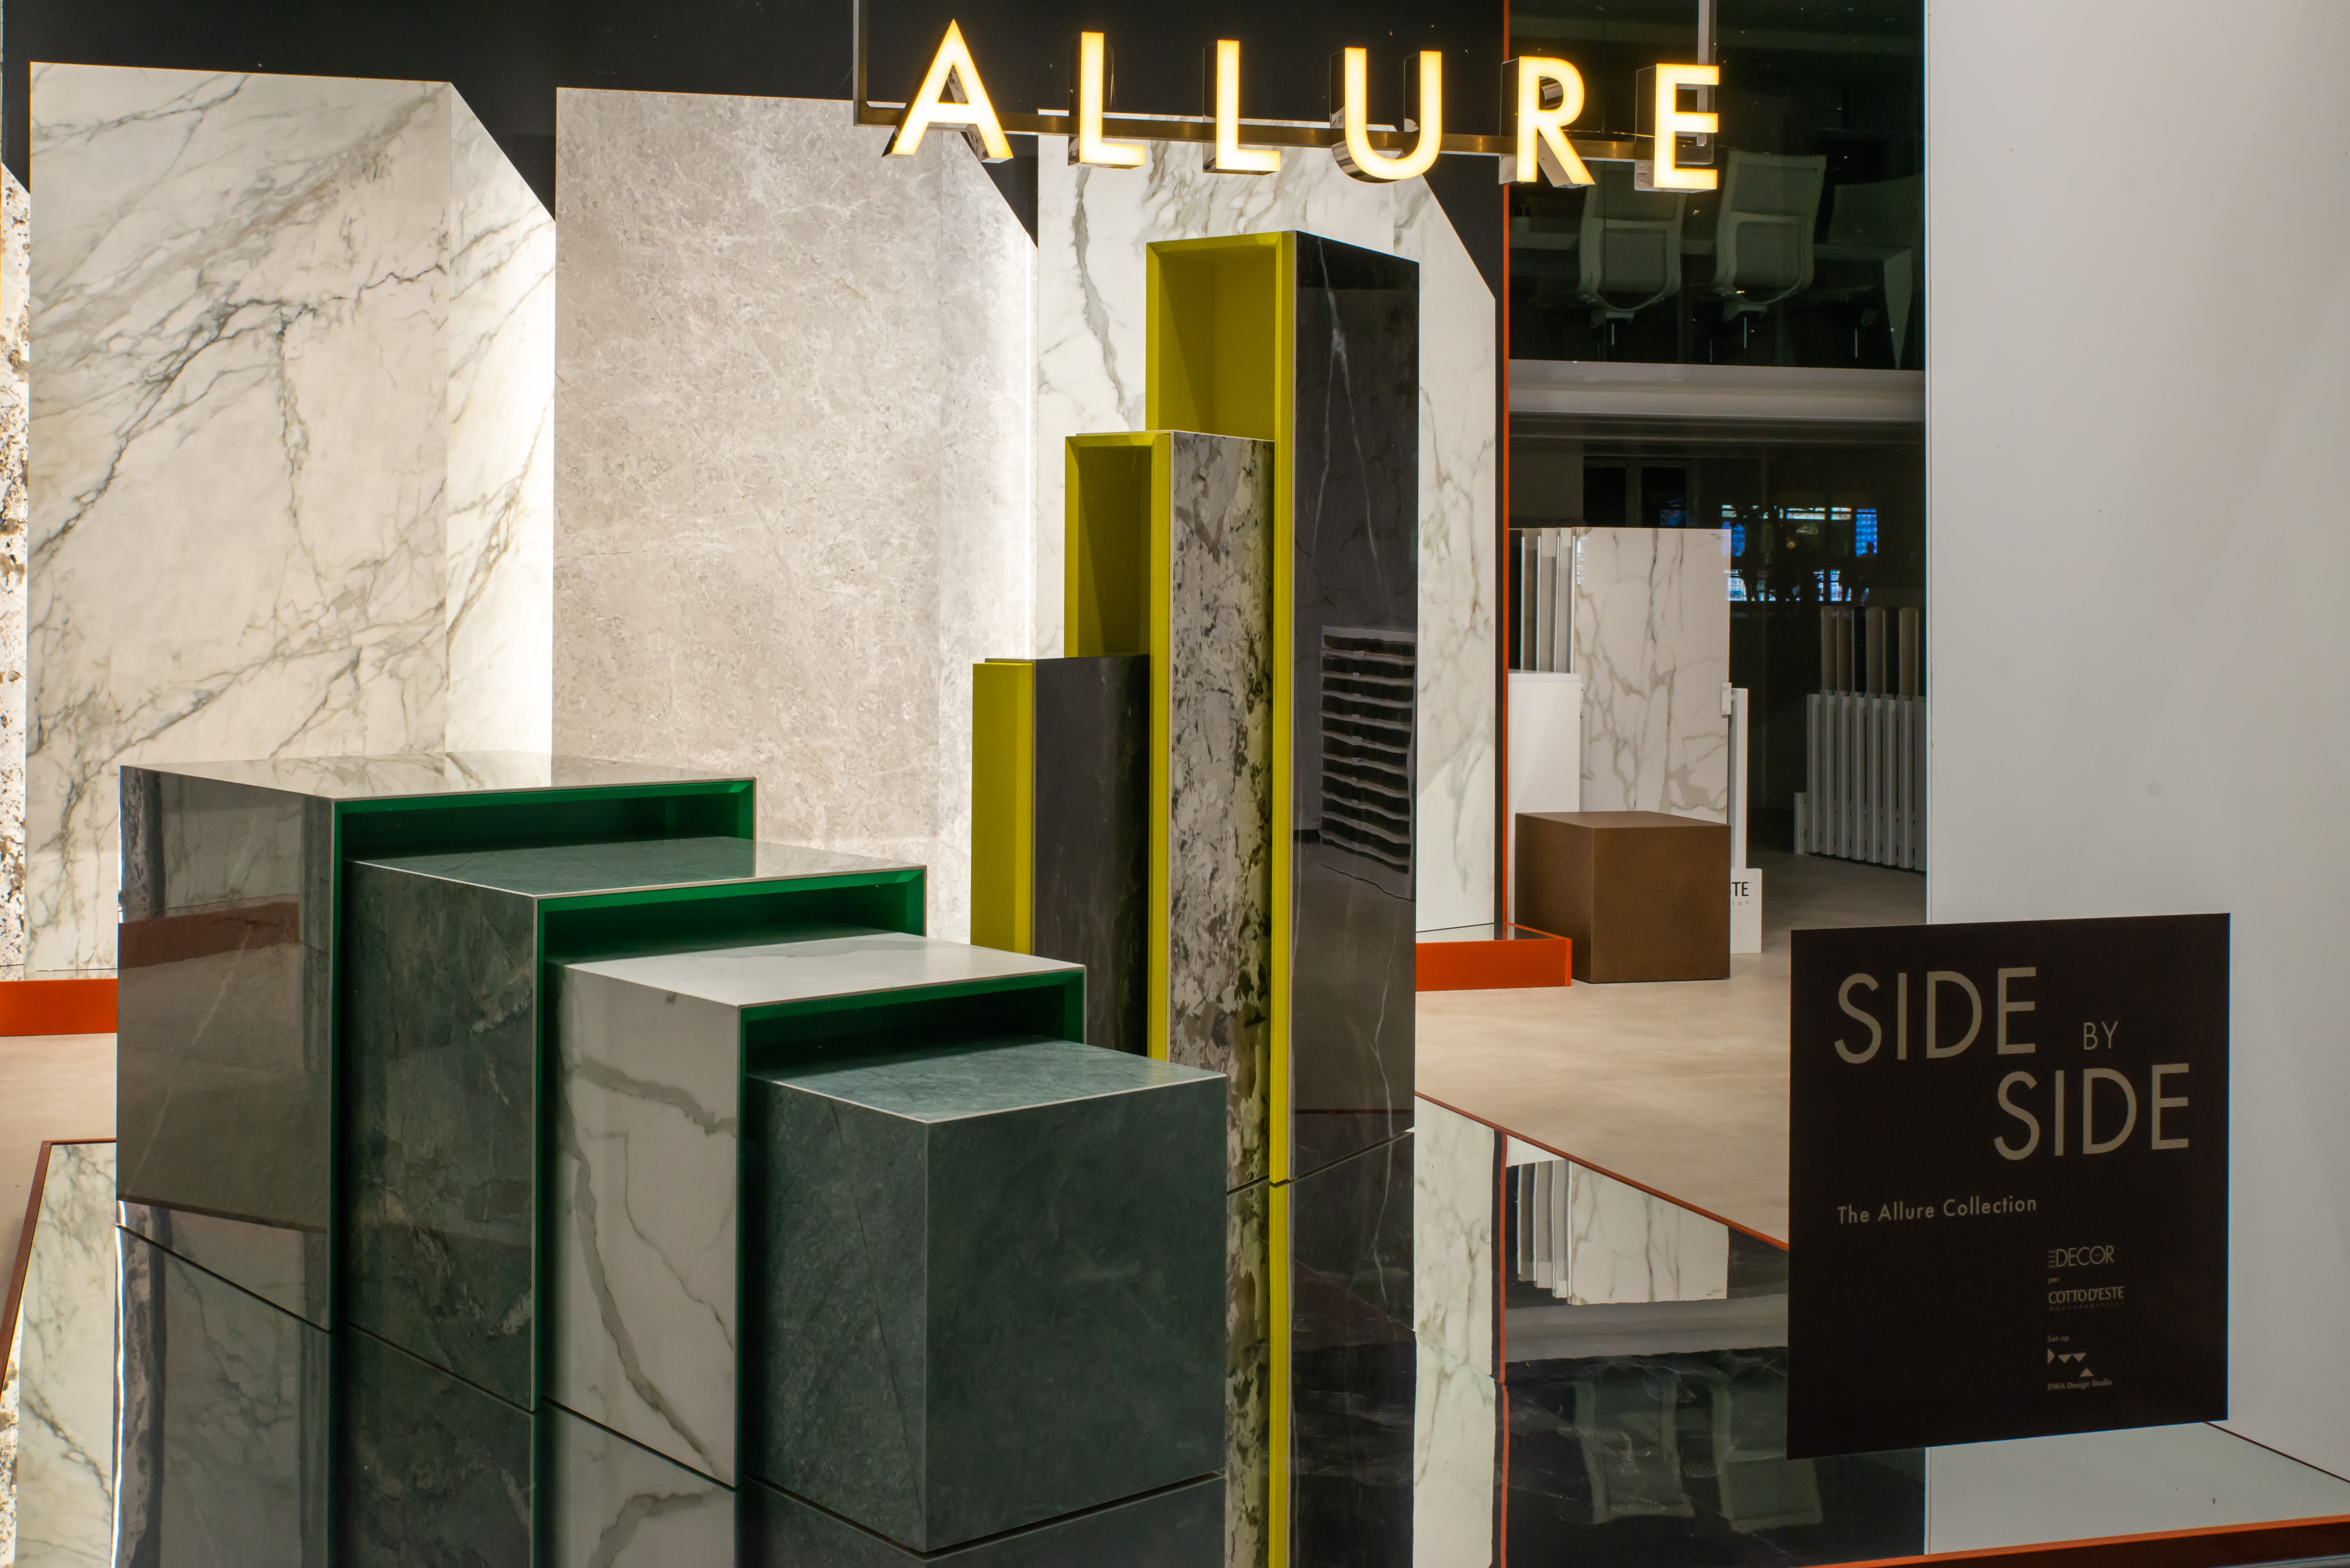 Side by side: the Allure collection: Foto 10